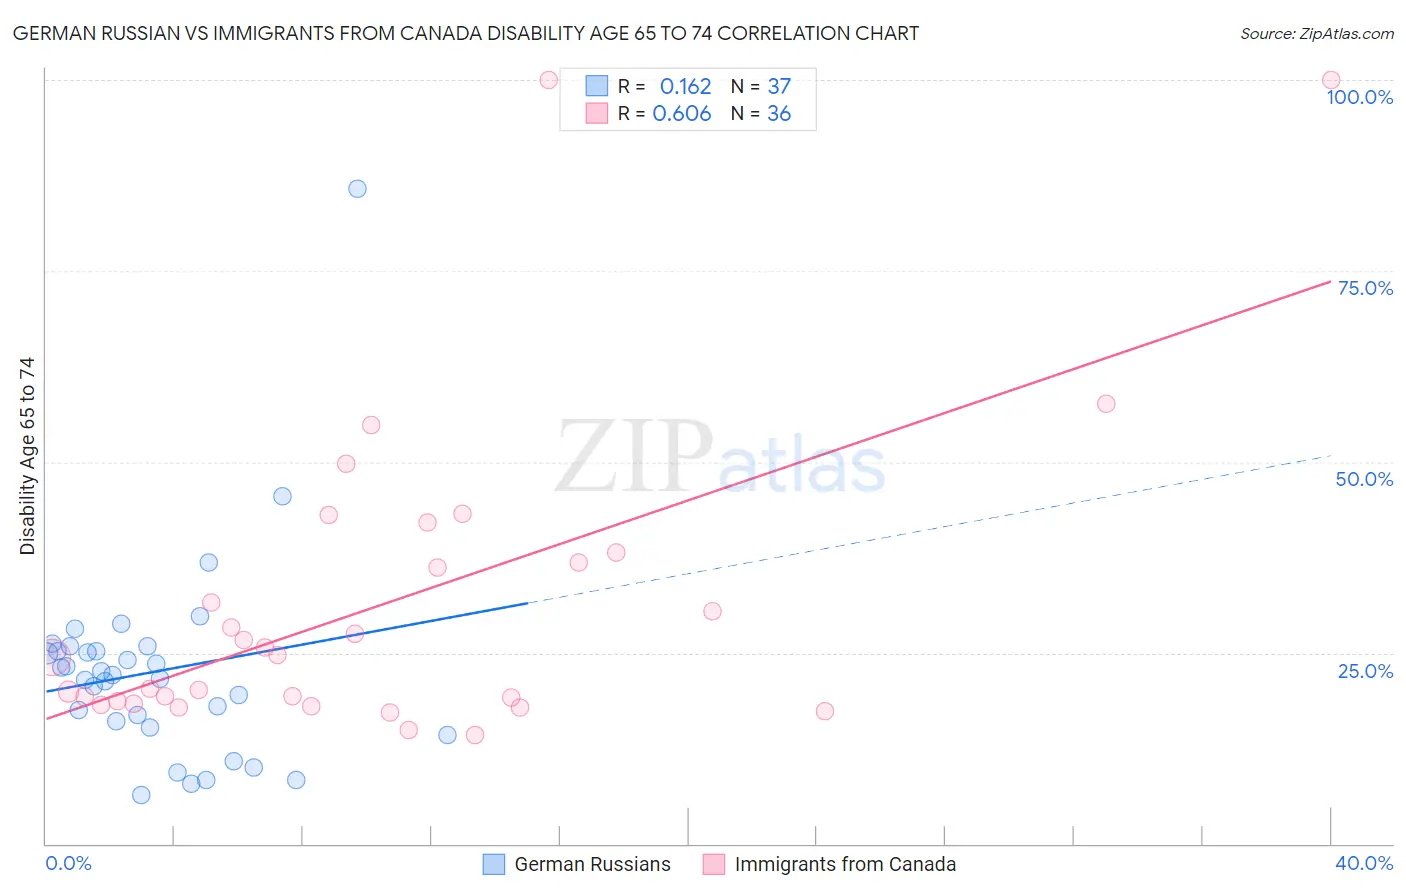 German Russian vs Immigrants from Canada Disability Age 65 to 74